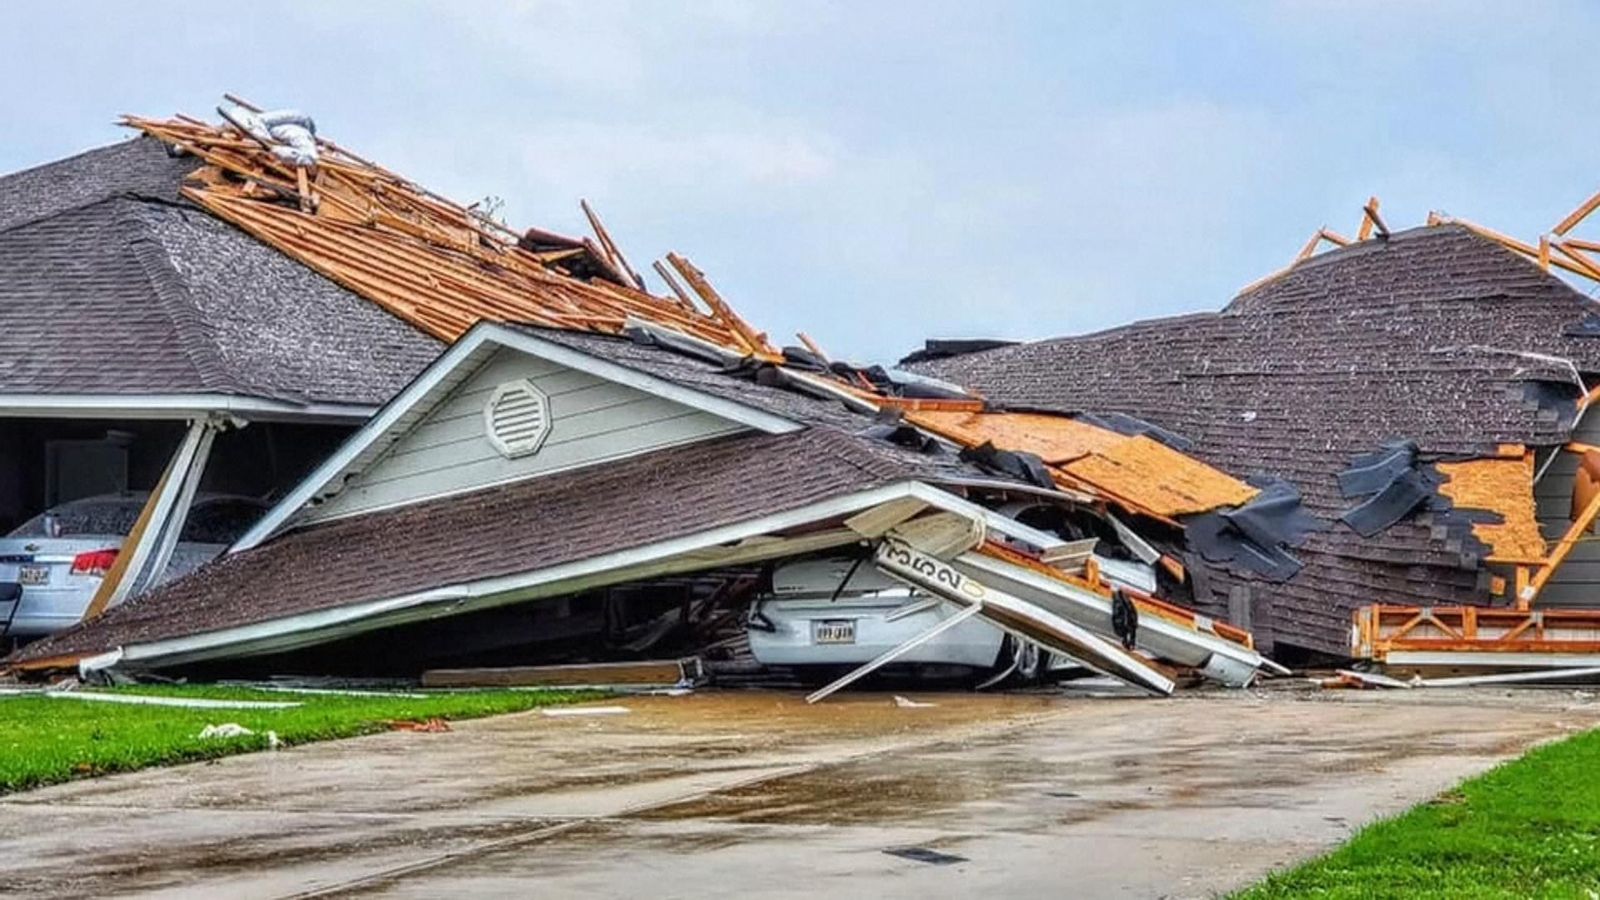 Tornadoes kill at least 30 people and damage hundreds of homes in